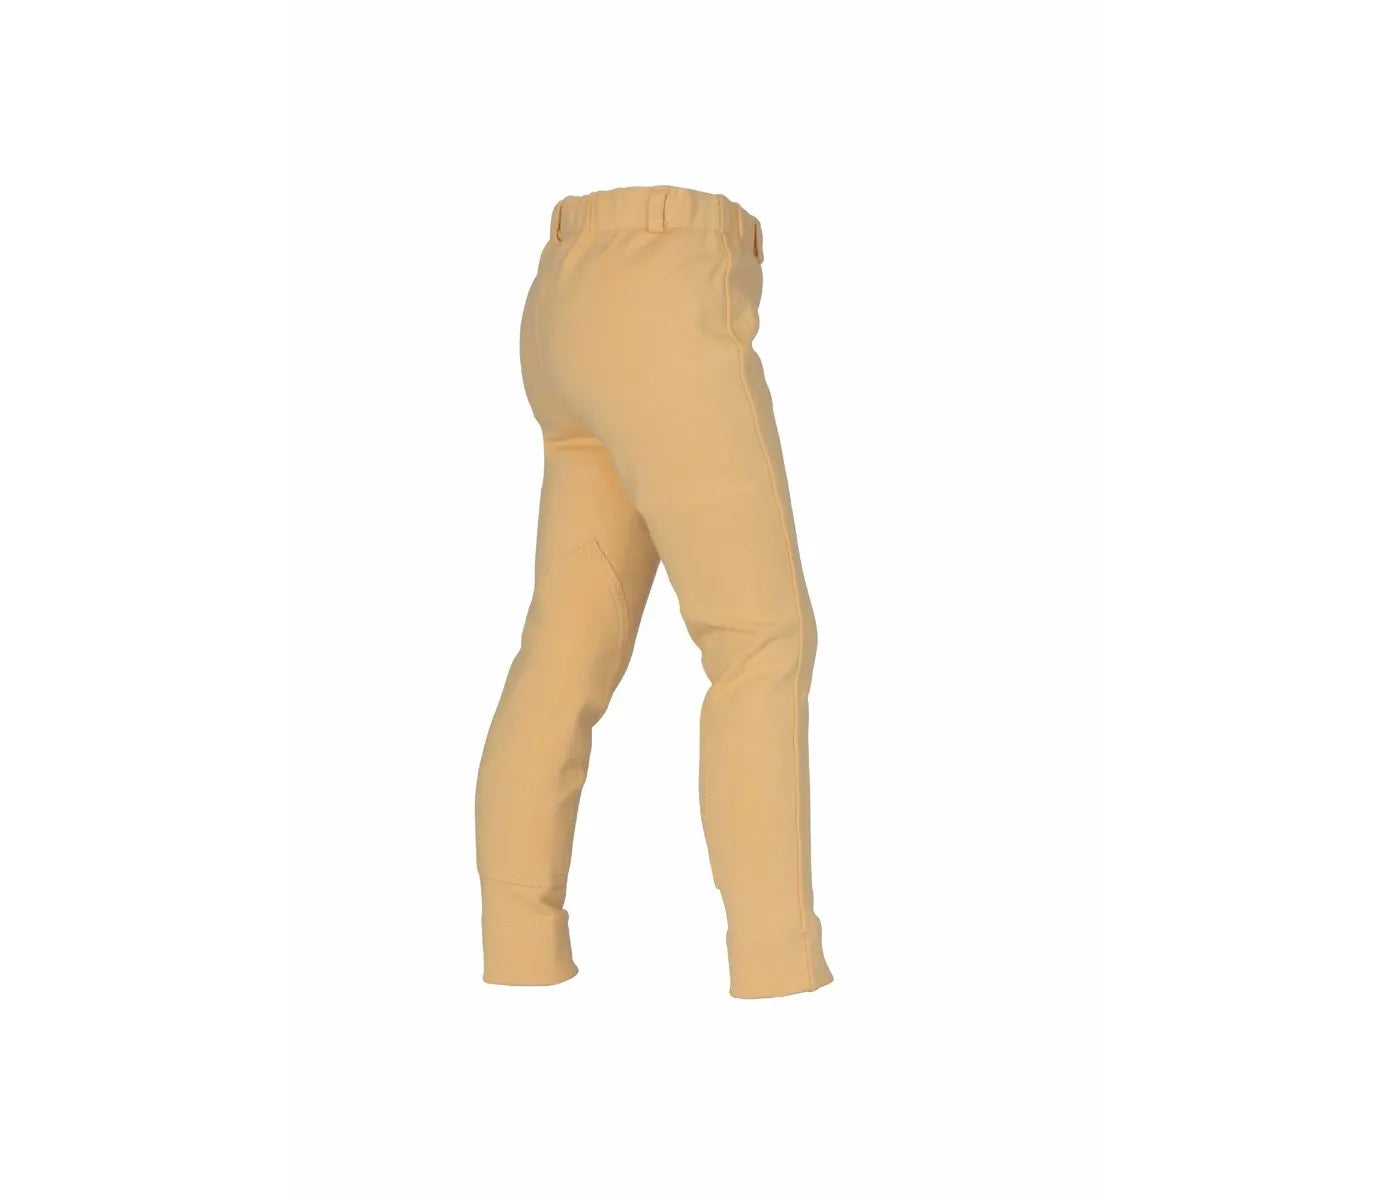 Shires Canary Wessex Jodhpurs - Childs